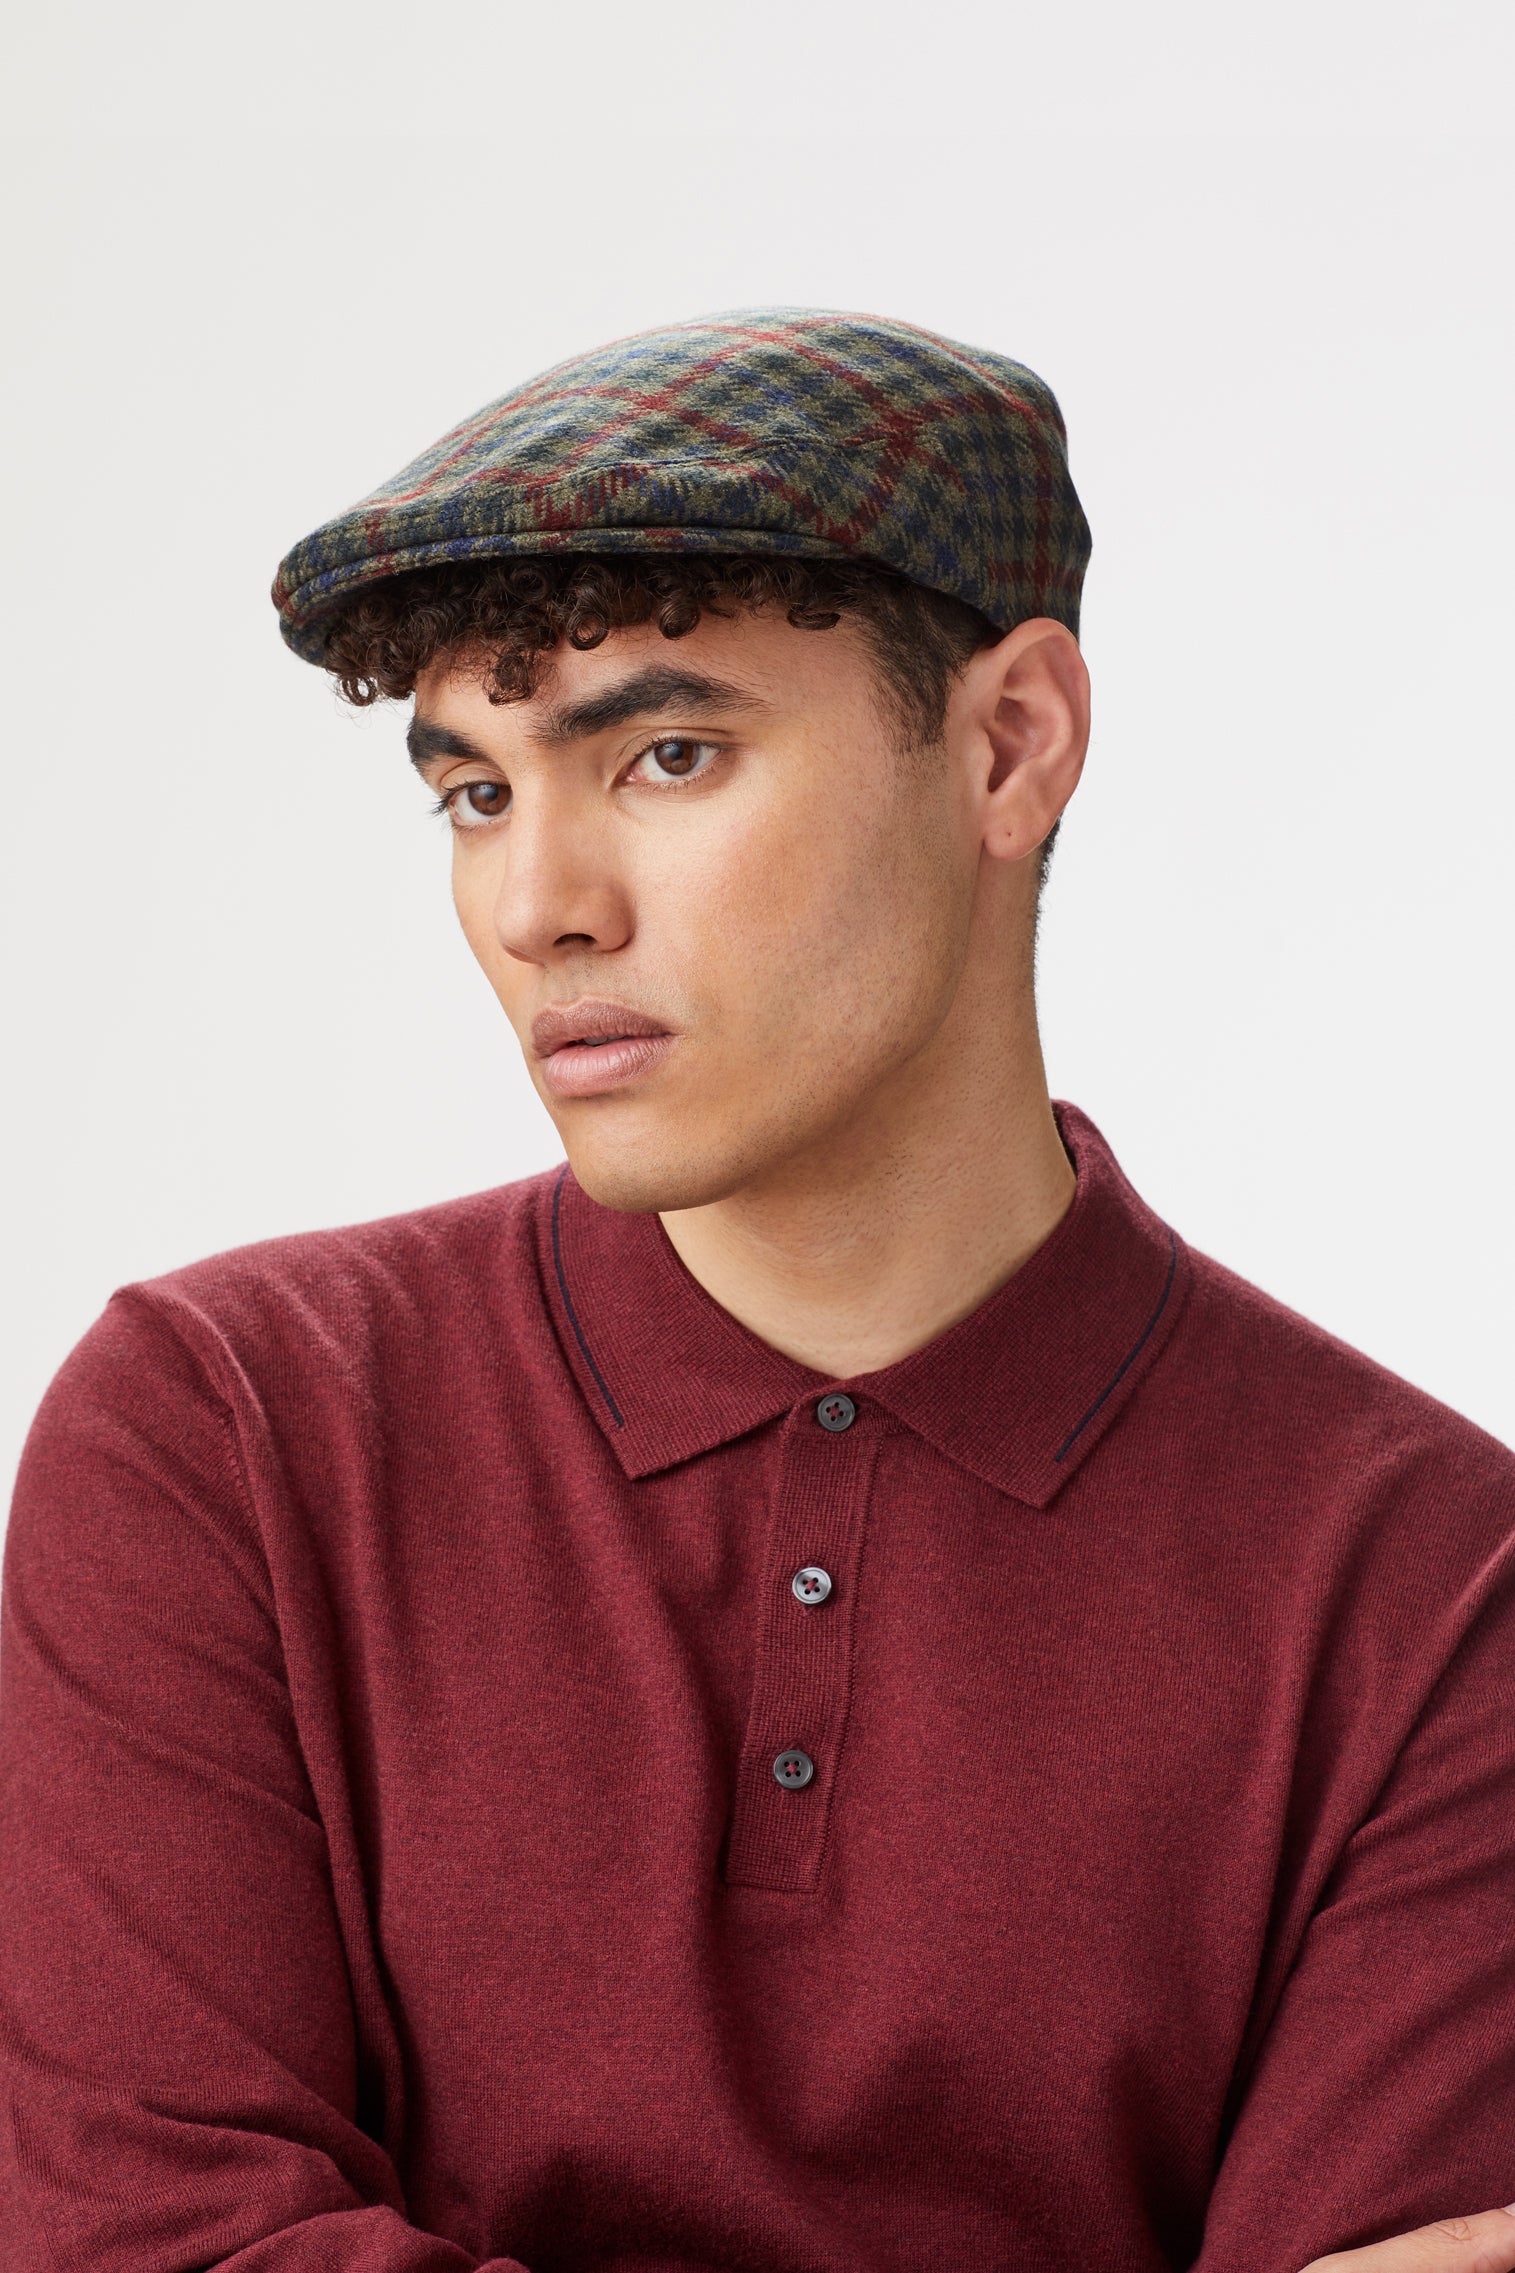 Gill Cashmere Flat Cap - Products - Lock & Co. Hatters London UK